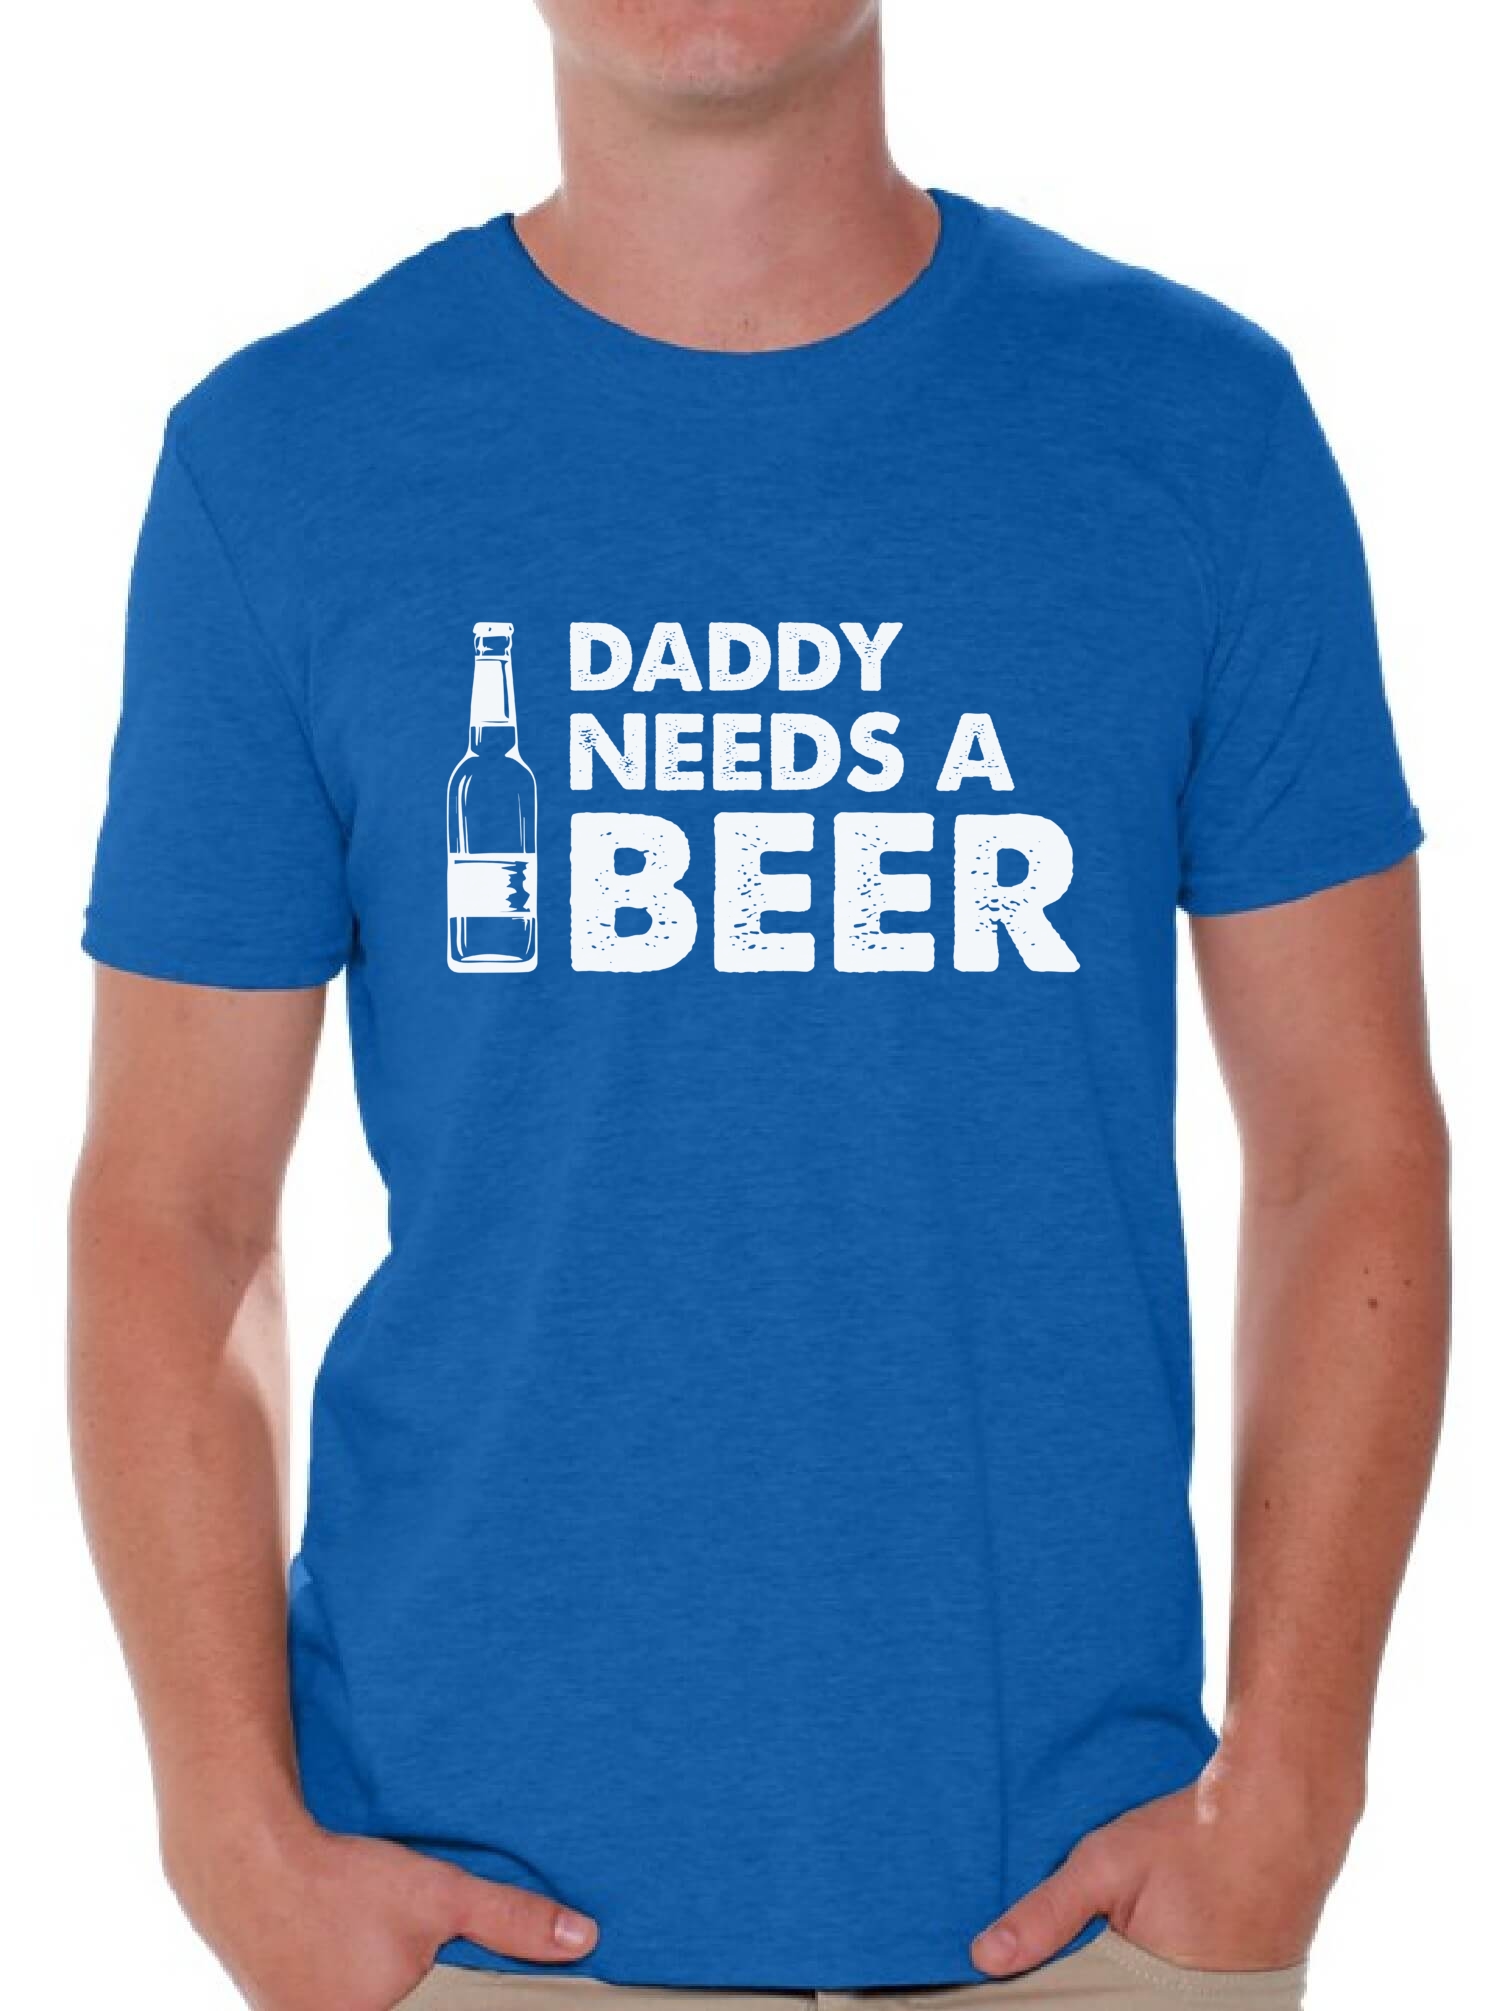 Daddy Needs A Beer T shirt Tops Shirt Beer Saying Gift for Dad Father's ...